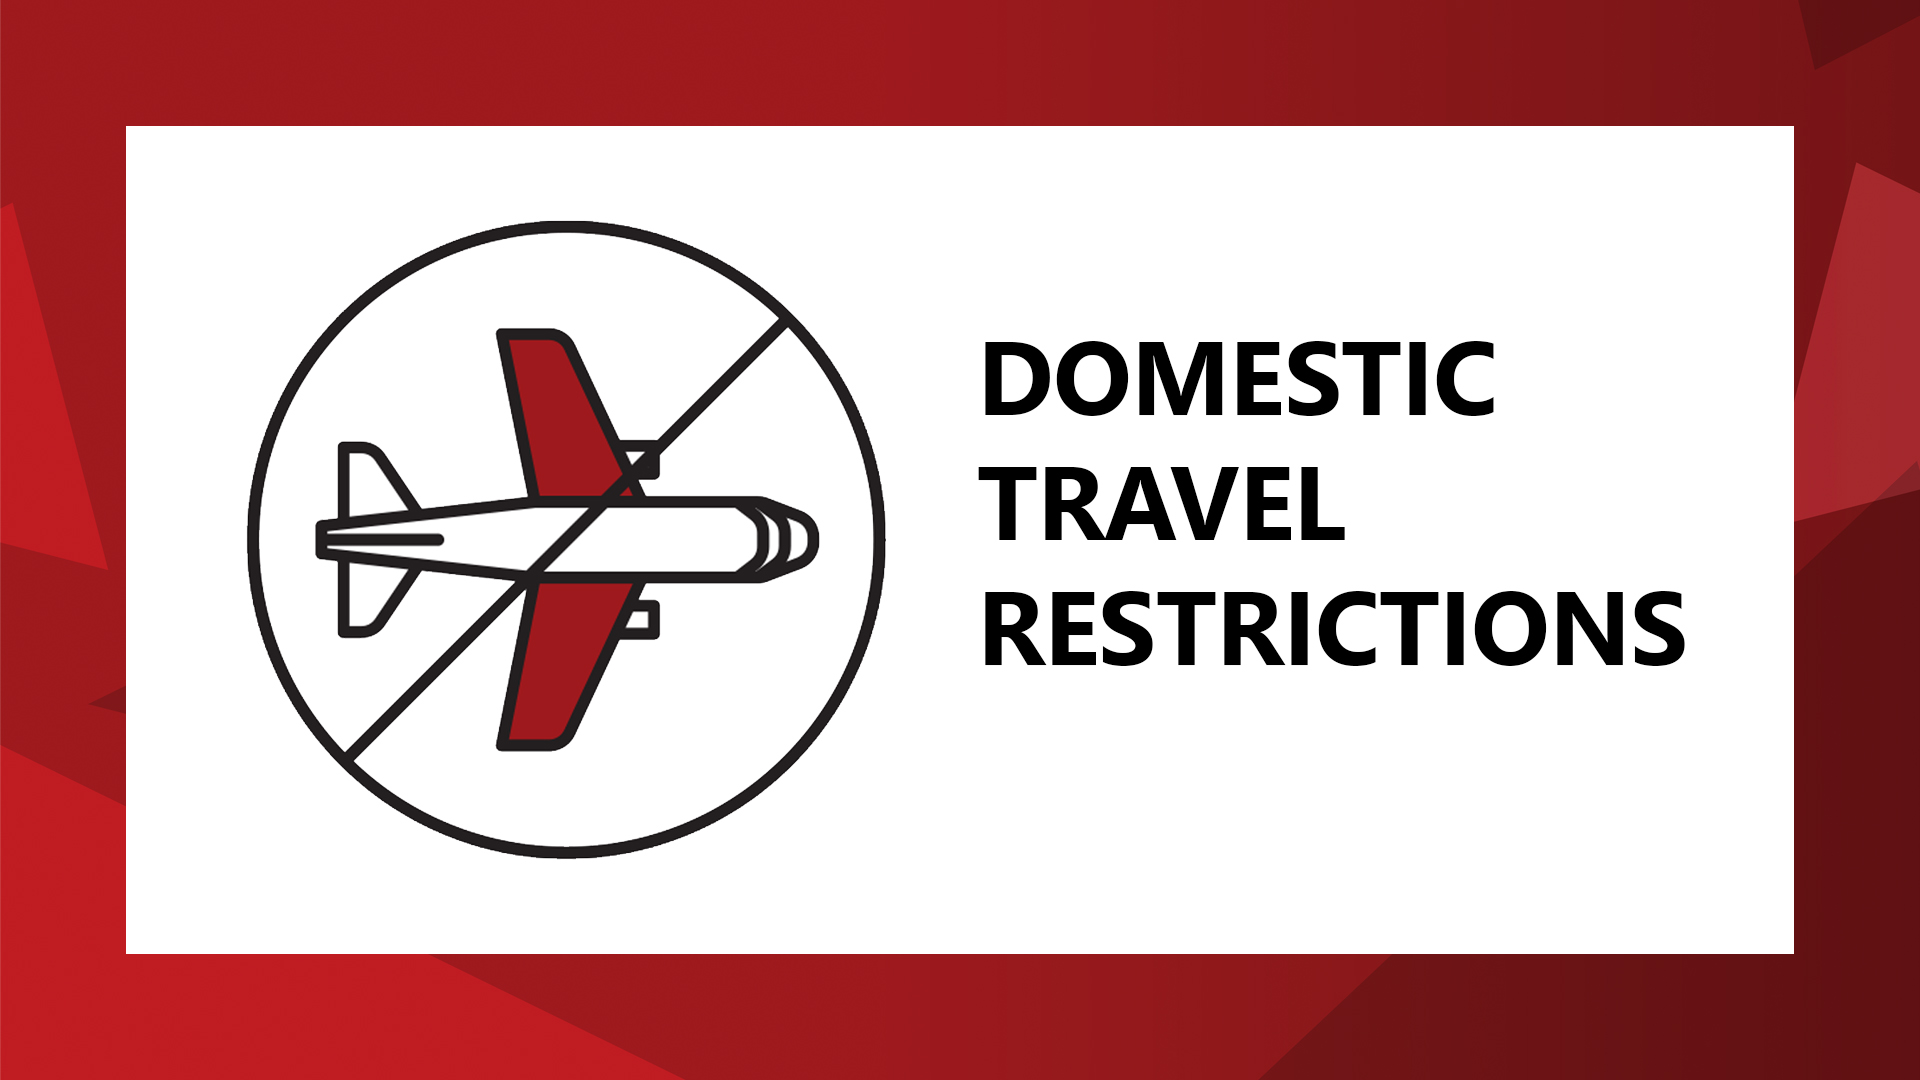 military travel country restrictions